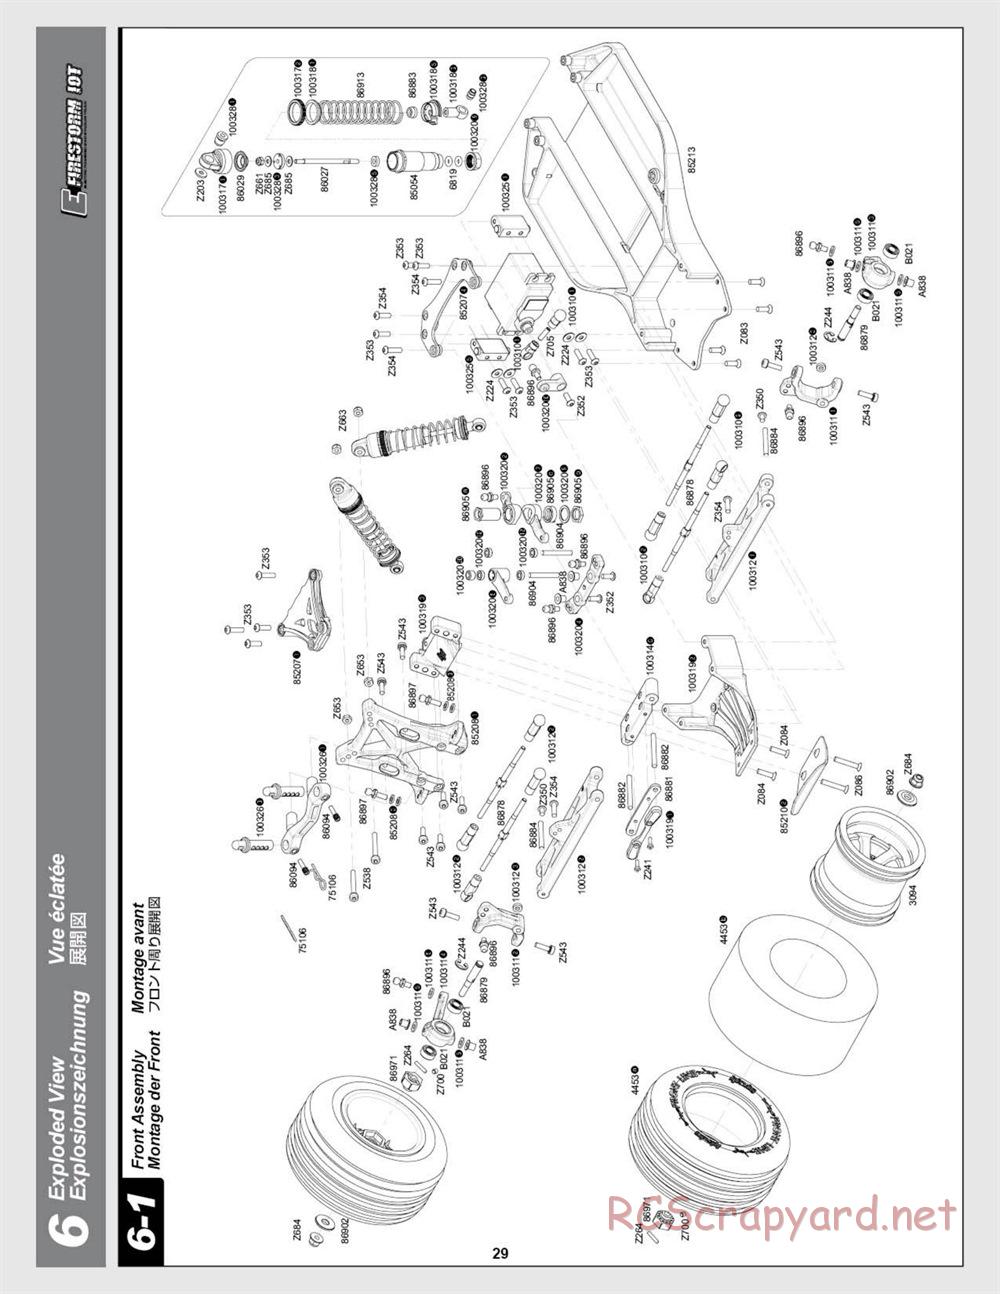 HPI - E-Firestorm 10T - Exploded View - Page 29